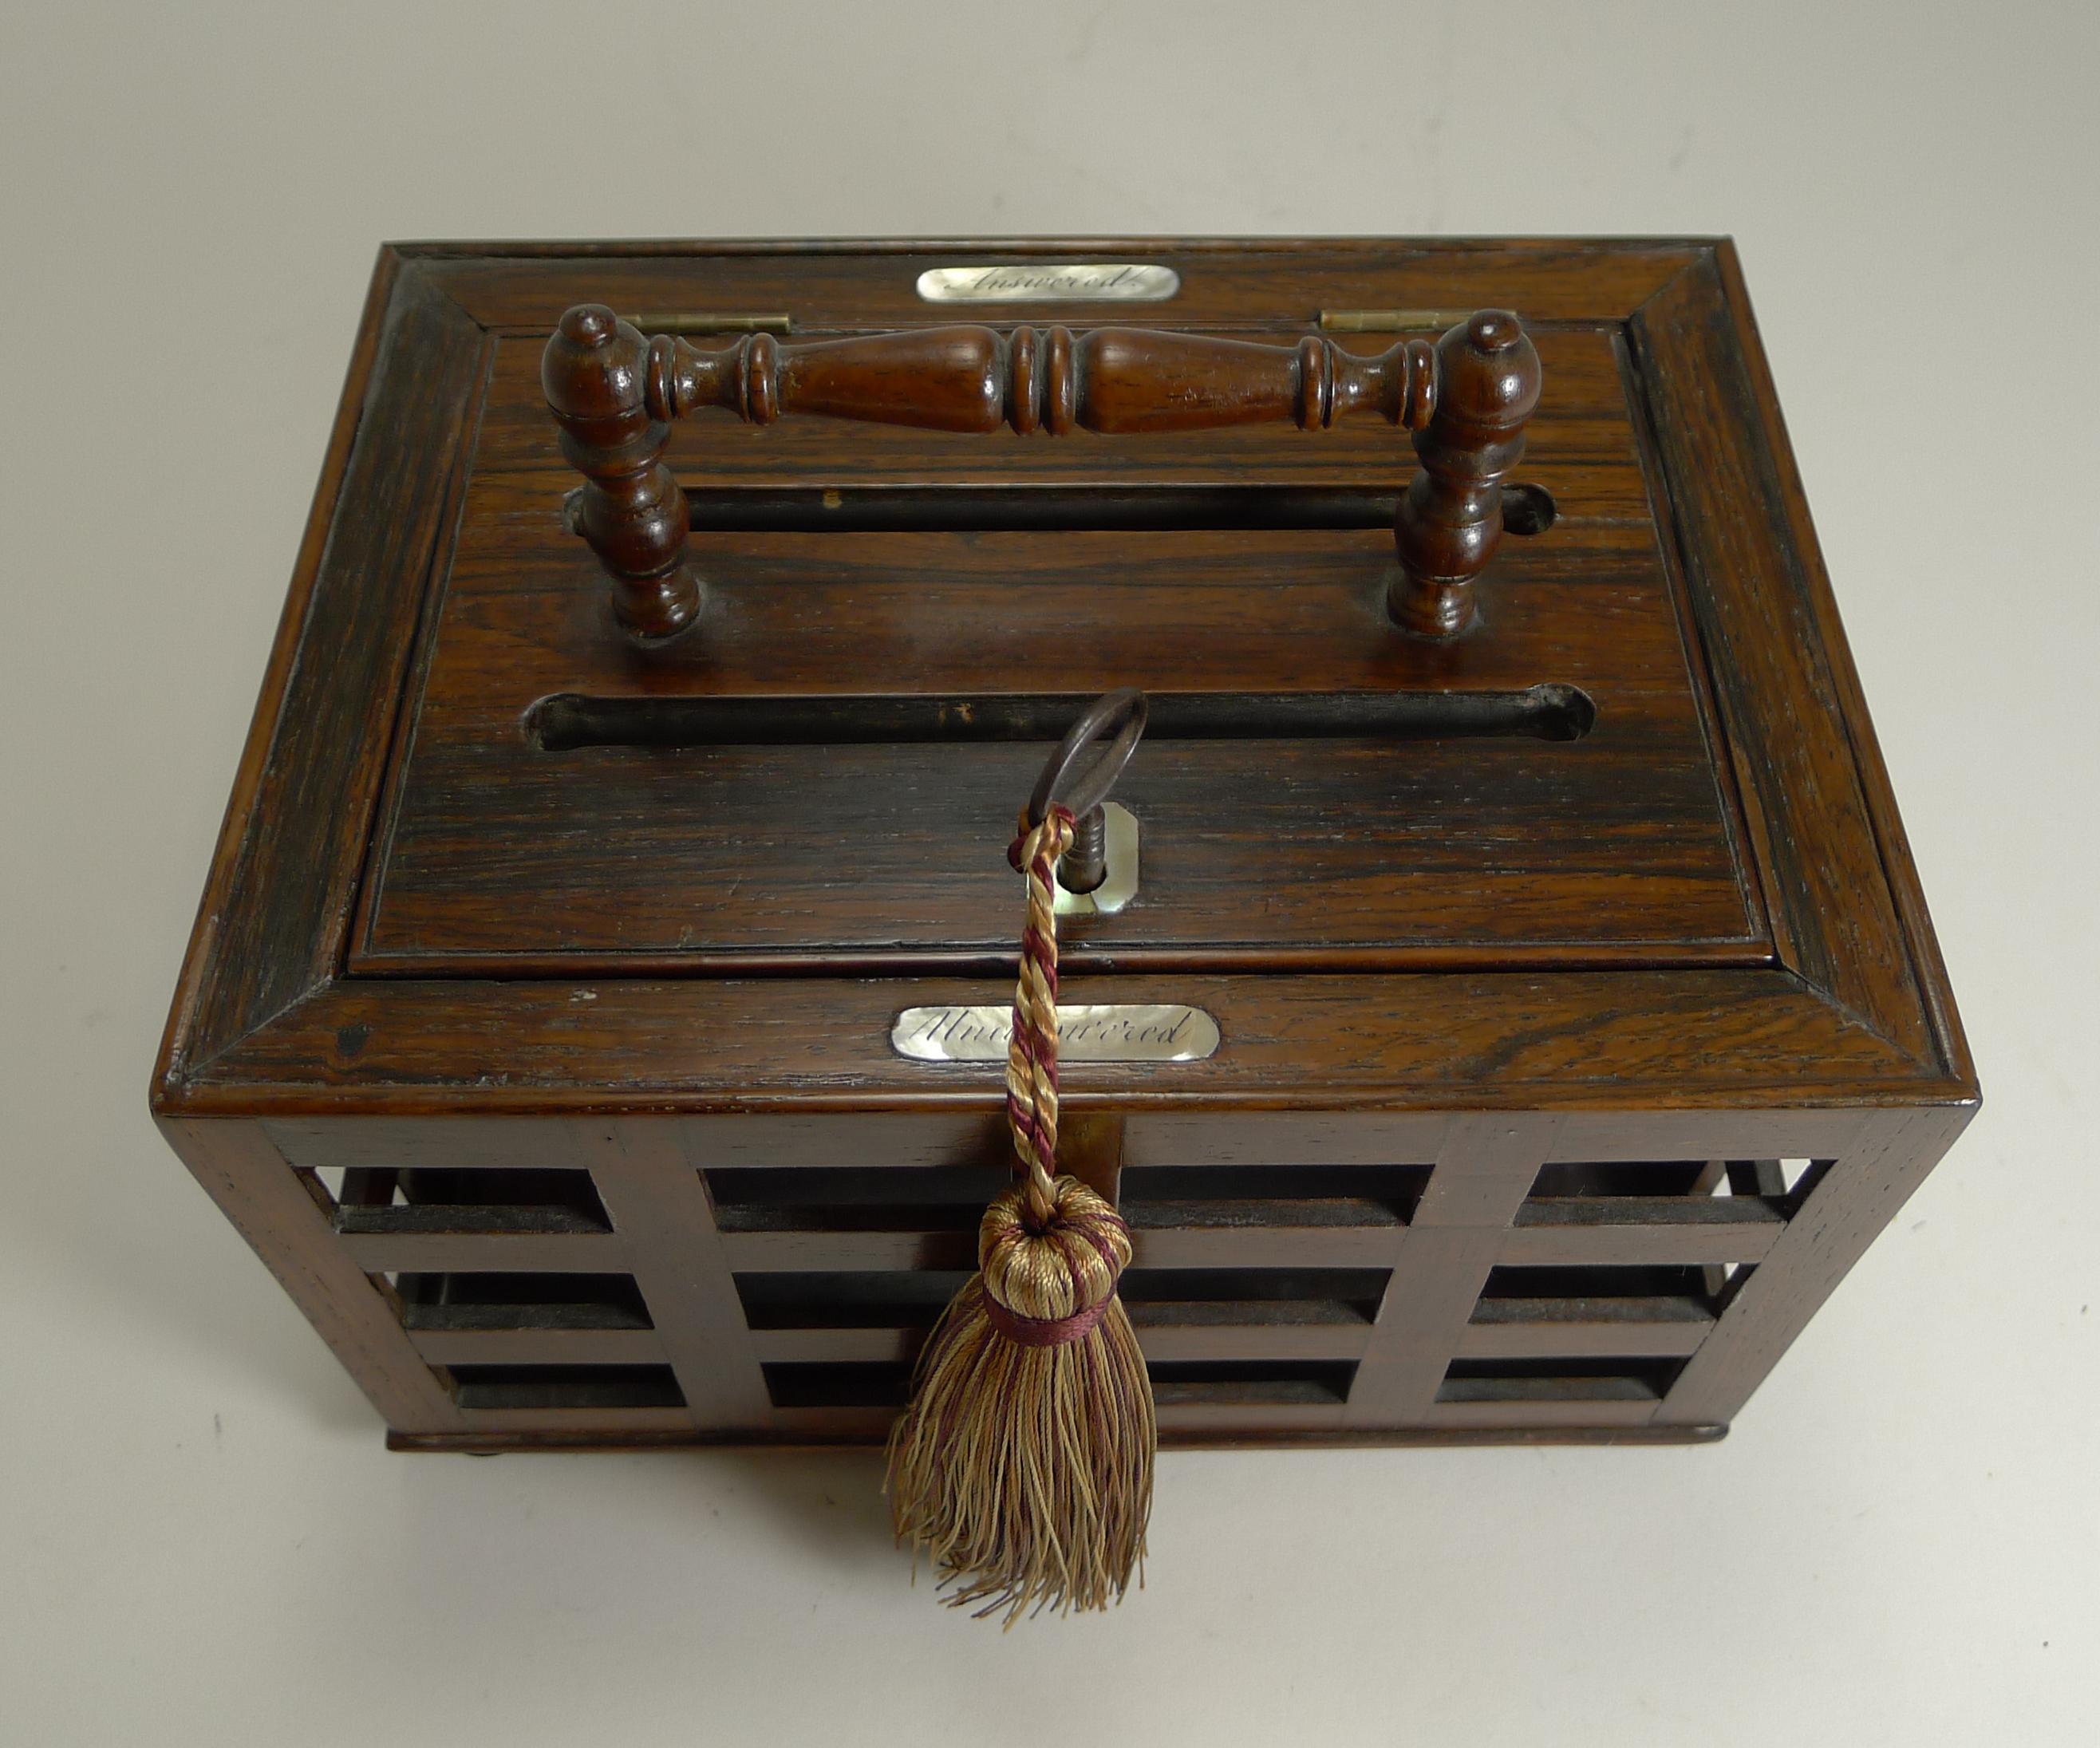 Antique English Regency Letter Box in Rosewood, circa 1820 (Englisch)